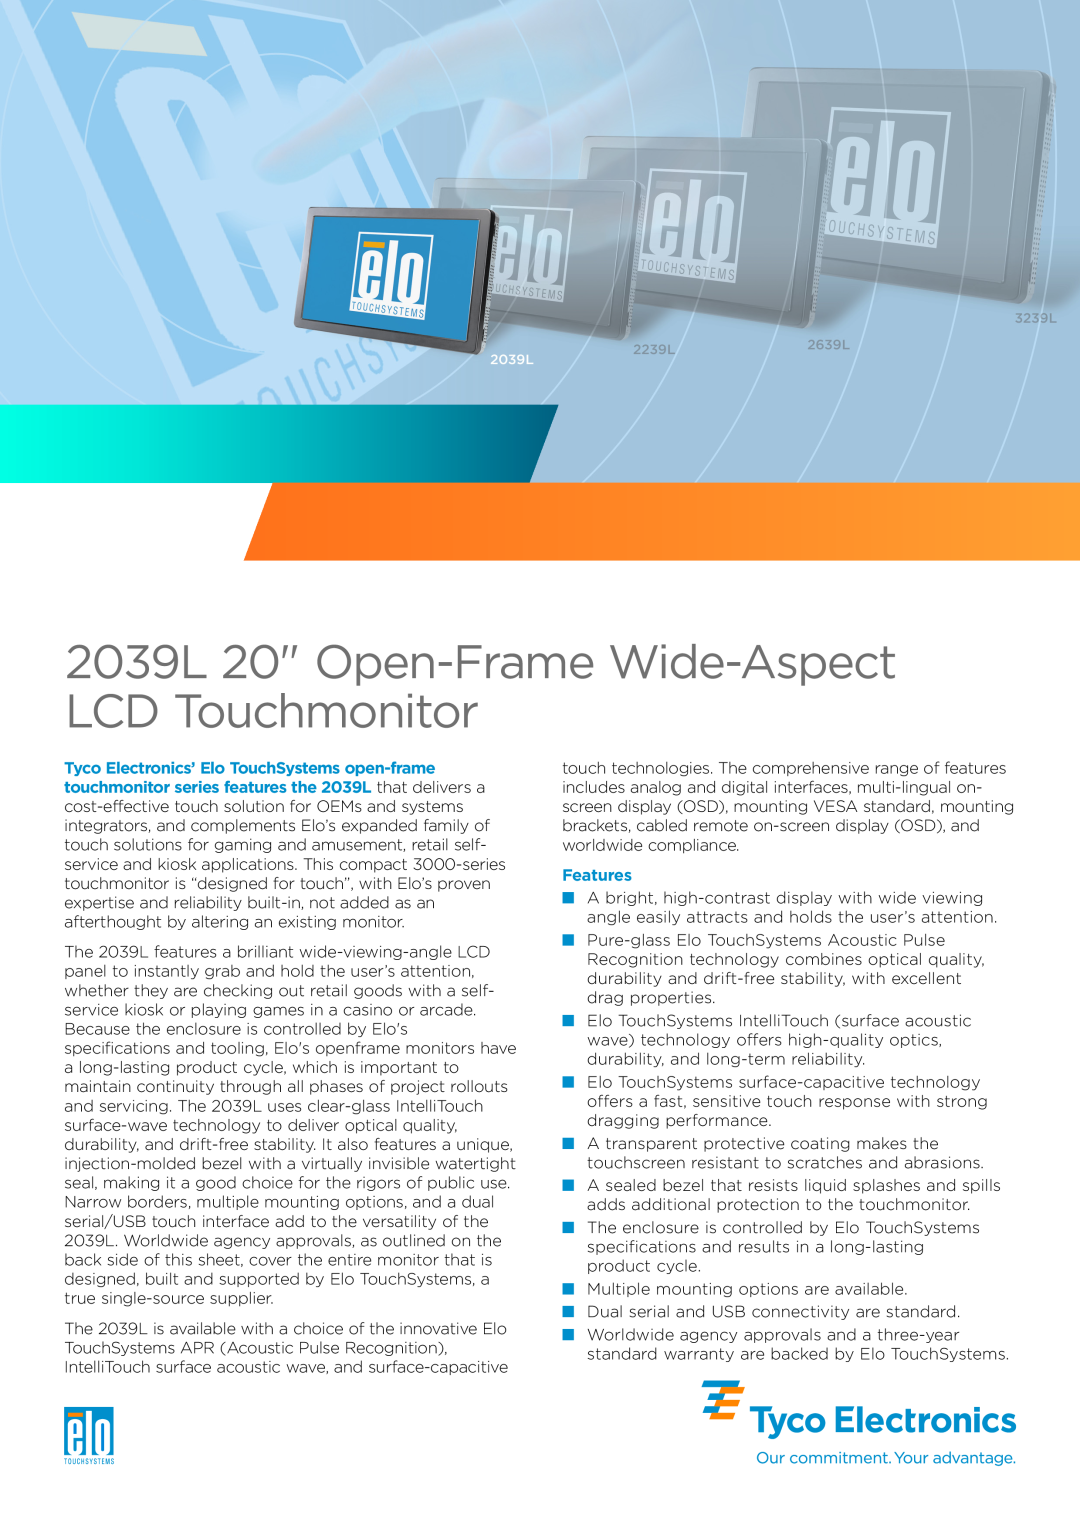 Elo TouchSystems specifications Features, 2039L 20 Open-Frame Wide-Aspect LCD Touchmonitor 